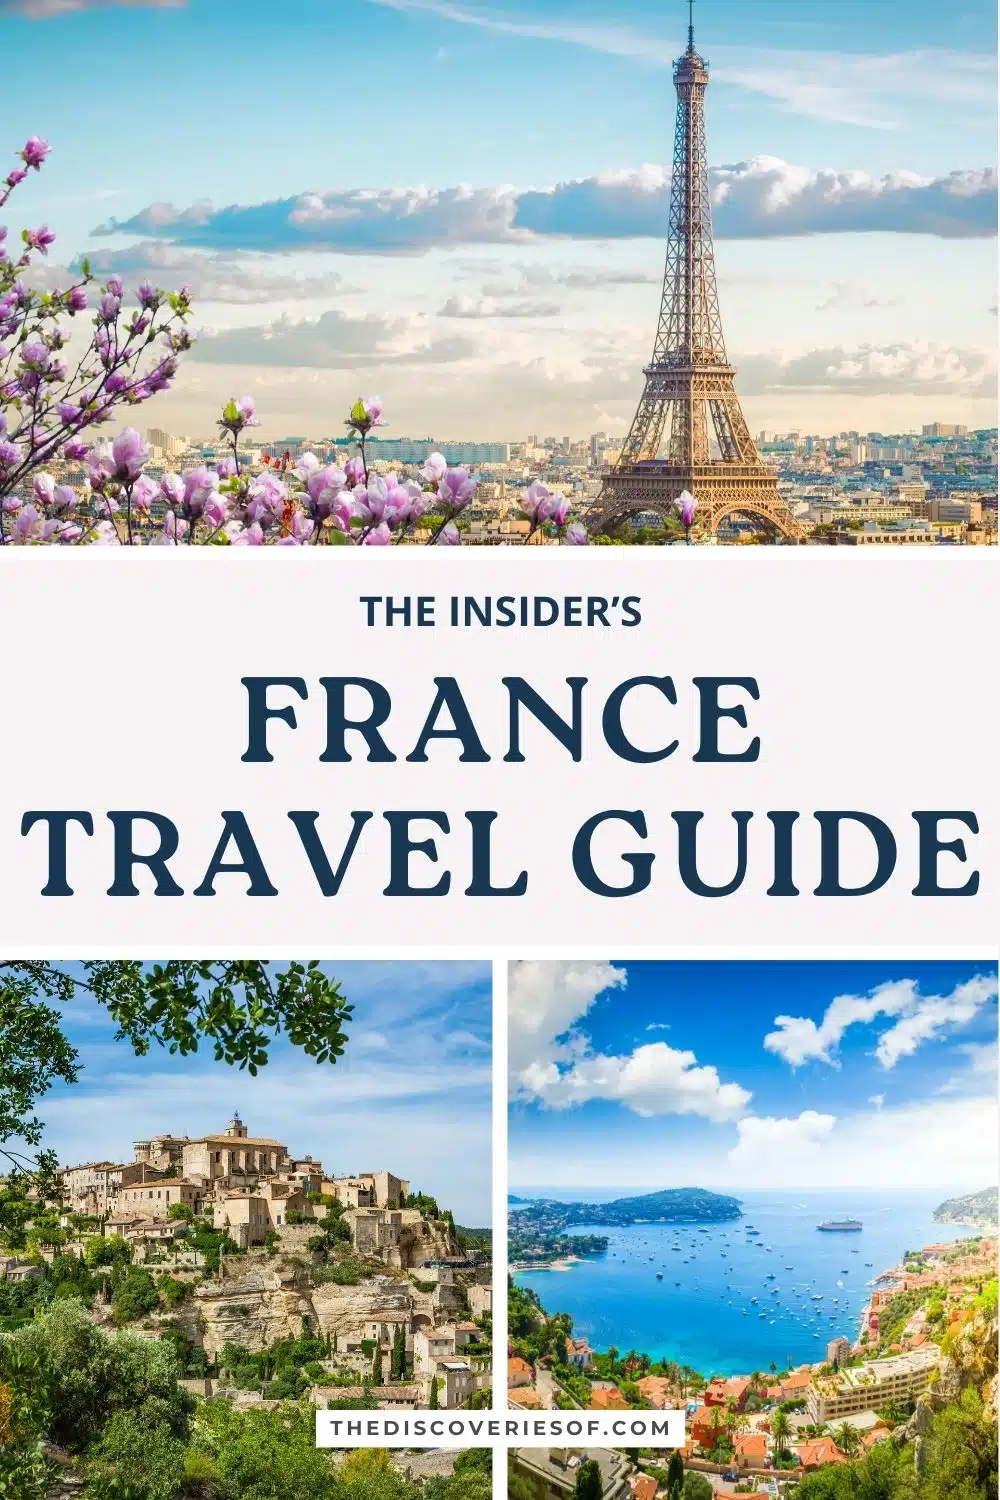 The Insider's France Travel Guide: Places to Visit, Tips & Costs